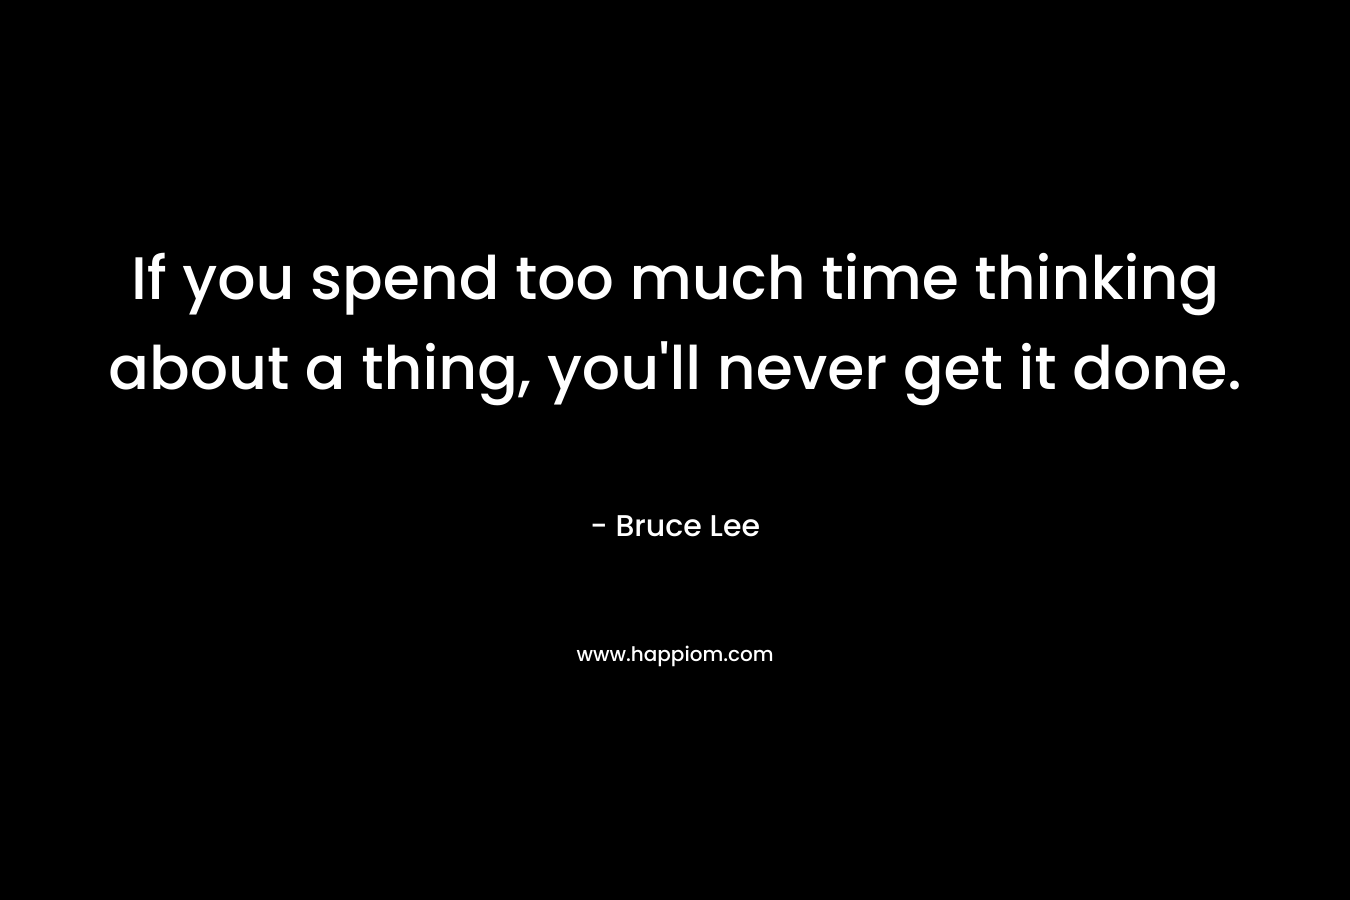 If you spend too much time thinking about a thing, you’ll never get it done. – Bruce Lee